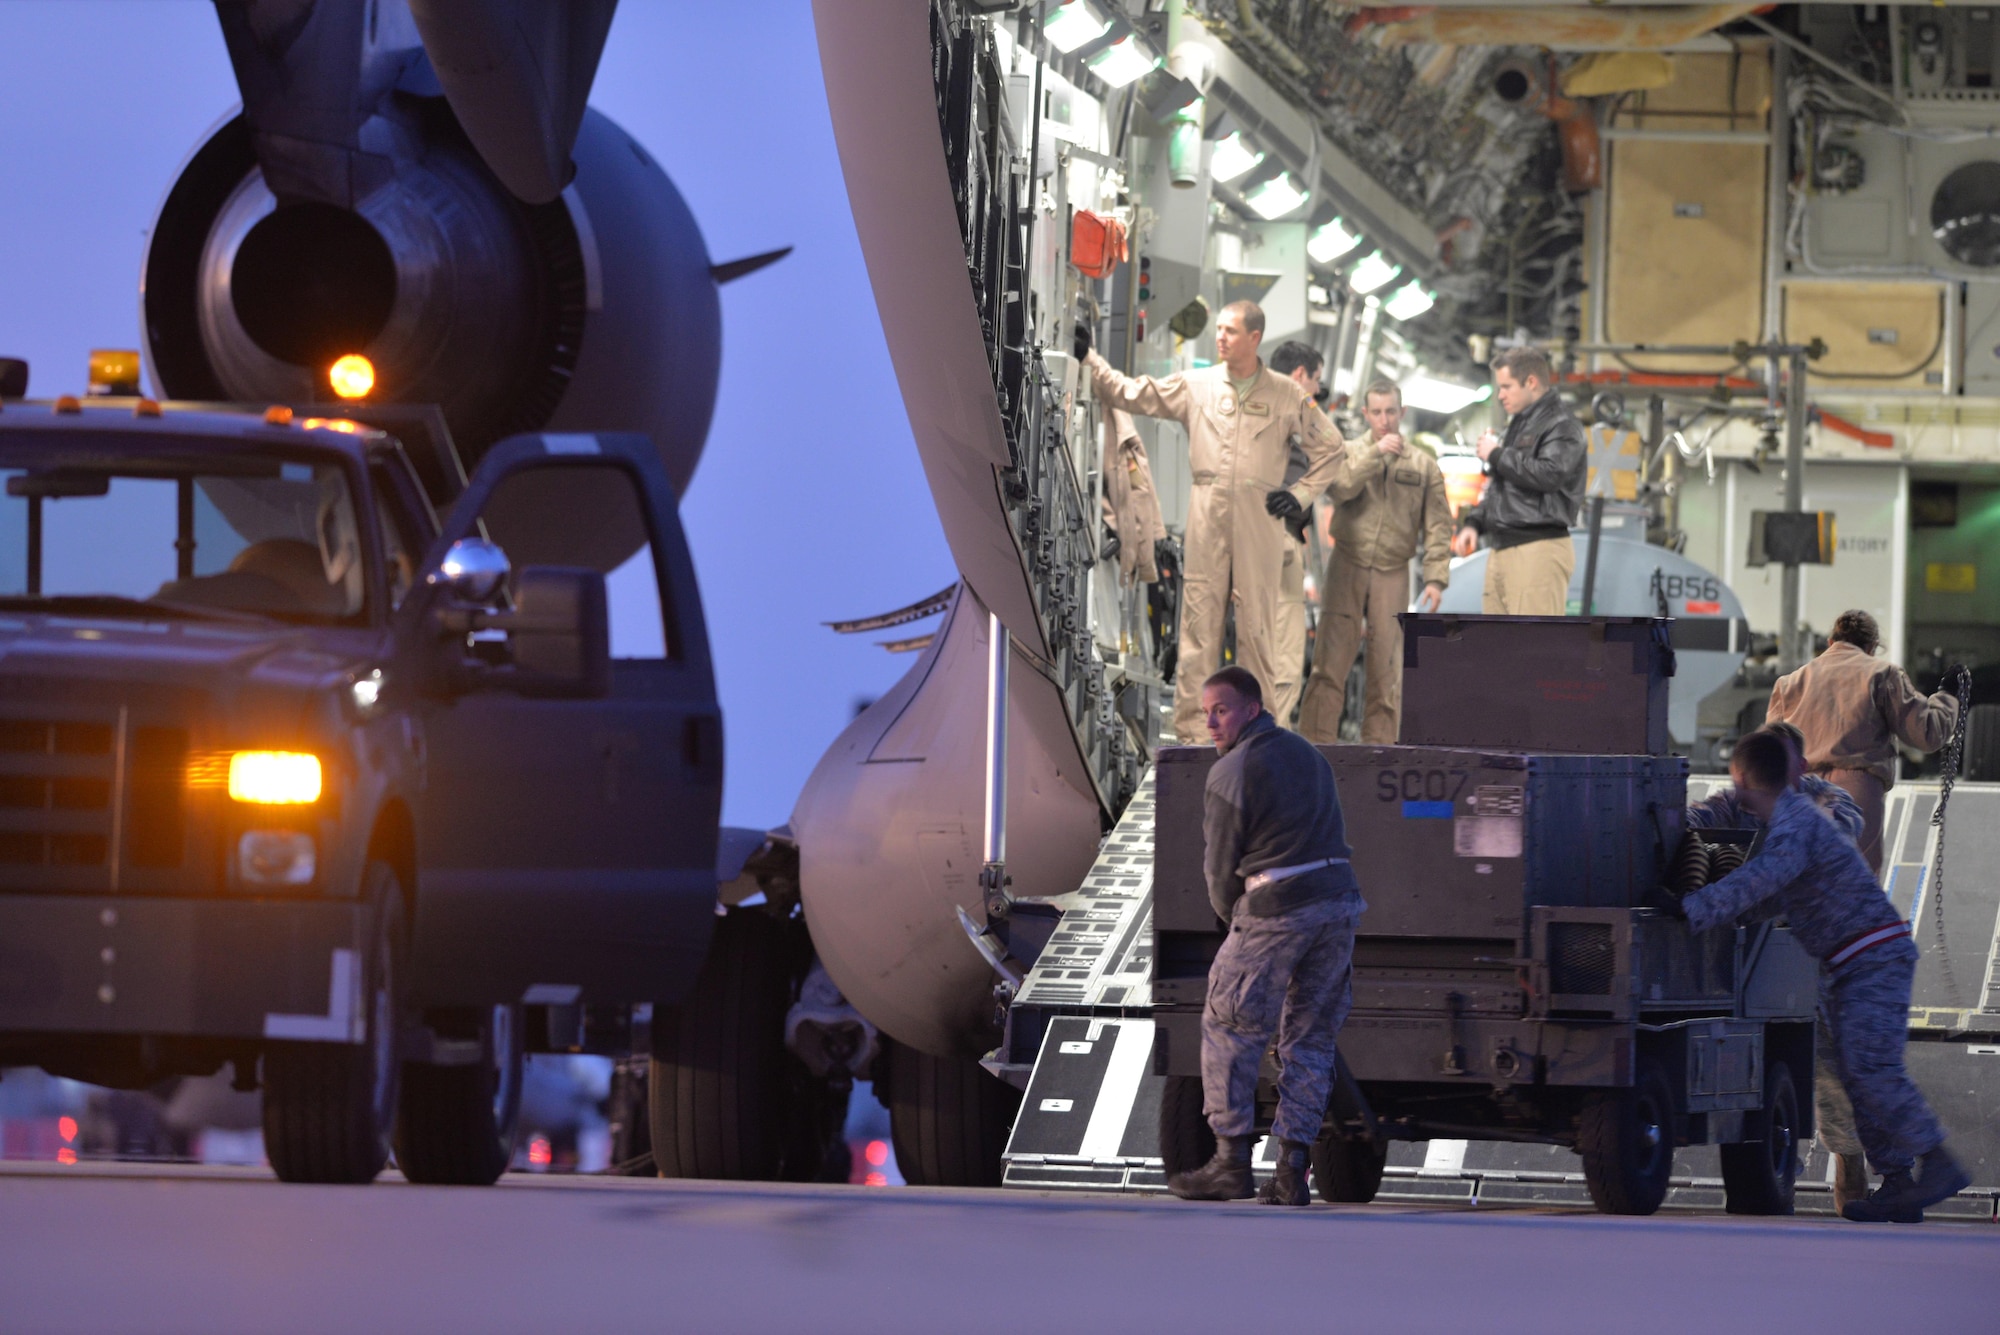 Airmen prepare to connect a power unit to a bobtail vehicle after unloading them from a C-17 Globemaster at Morón Air Base, Spain, Feb. 24, 2016. This equipment will be used by 2nd Bomb Wing personnel to support bomber operations during Exercise Cold Response 16, a large Norwegian-led NATO exercise involving maritime, land and air components that sustains and strengthens the operational and coordination capabilities of partner nations.